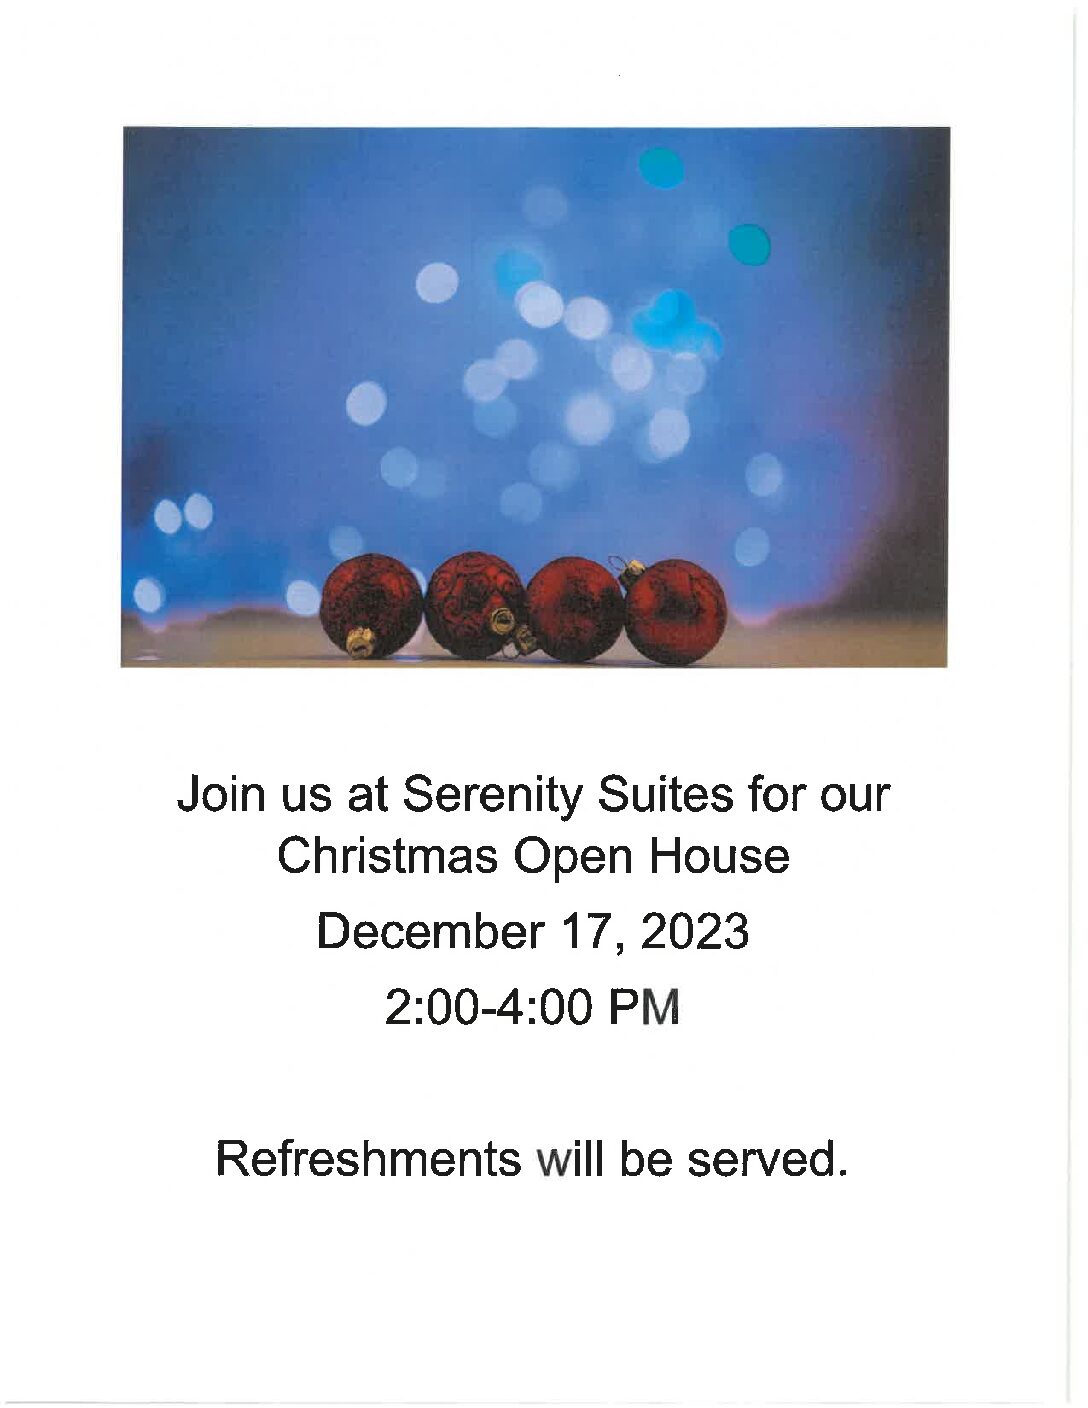 <h1 class="tribe-events-single-event-title">Serenity Suites Christmas Open House</h1>